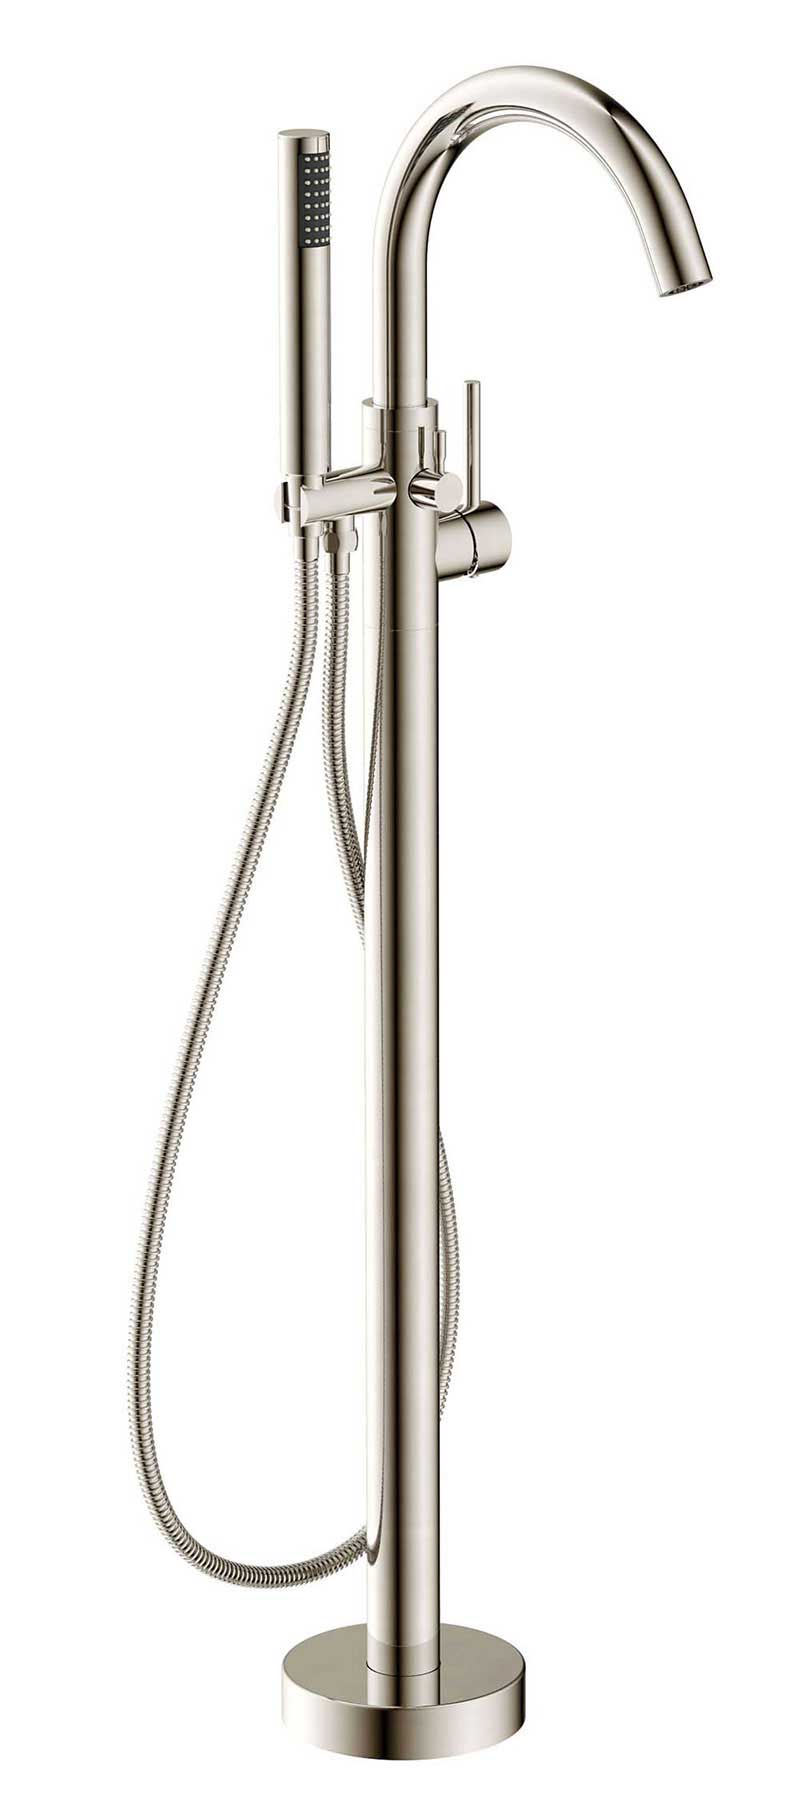 Anzzi Kros Series 2-Handle Freestanding Claw Foot Tub Faucet with Hand shower in Brushed Nickel